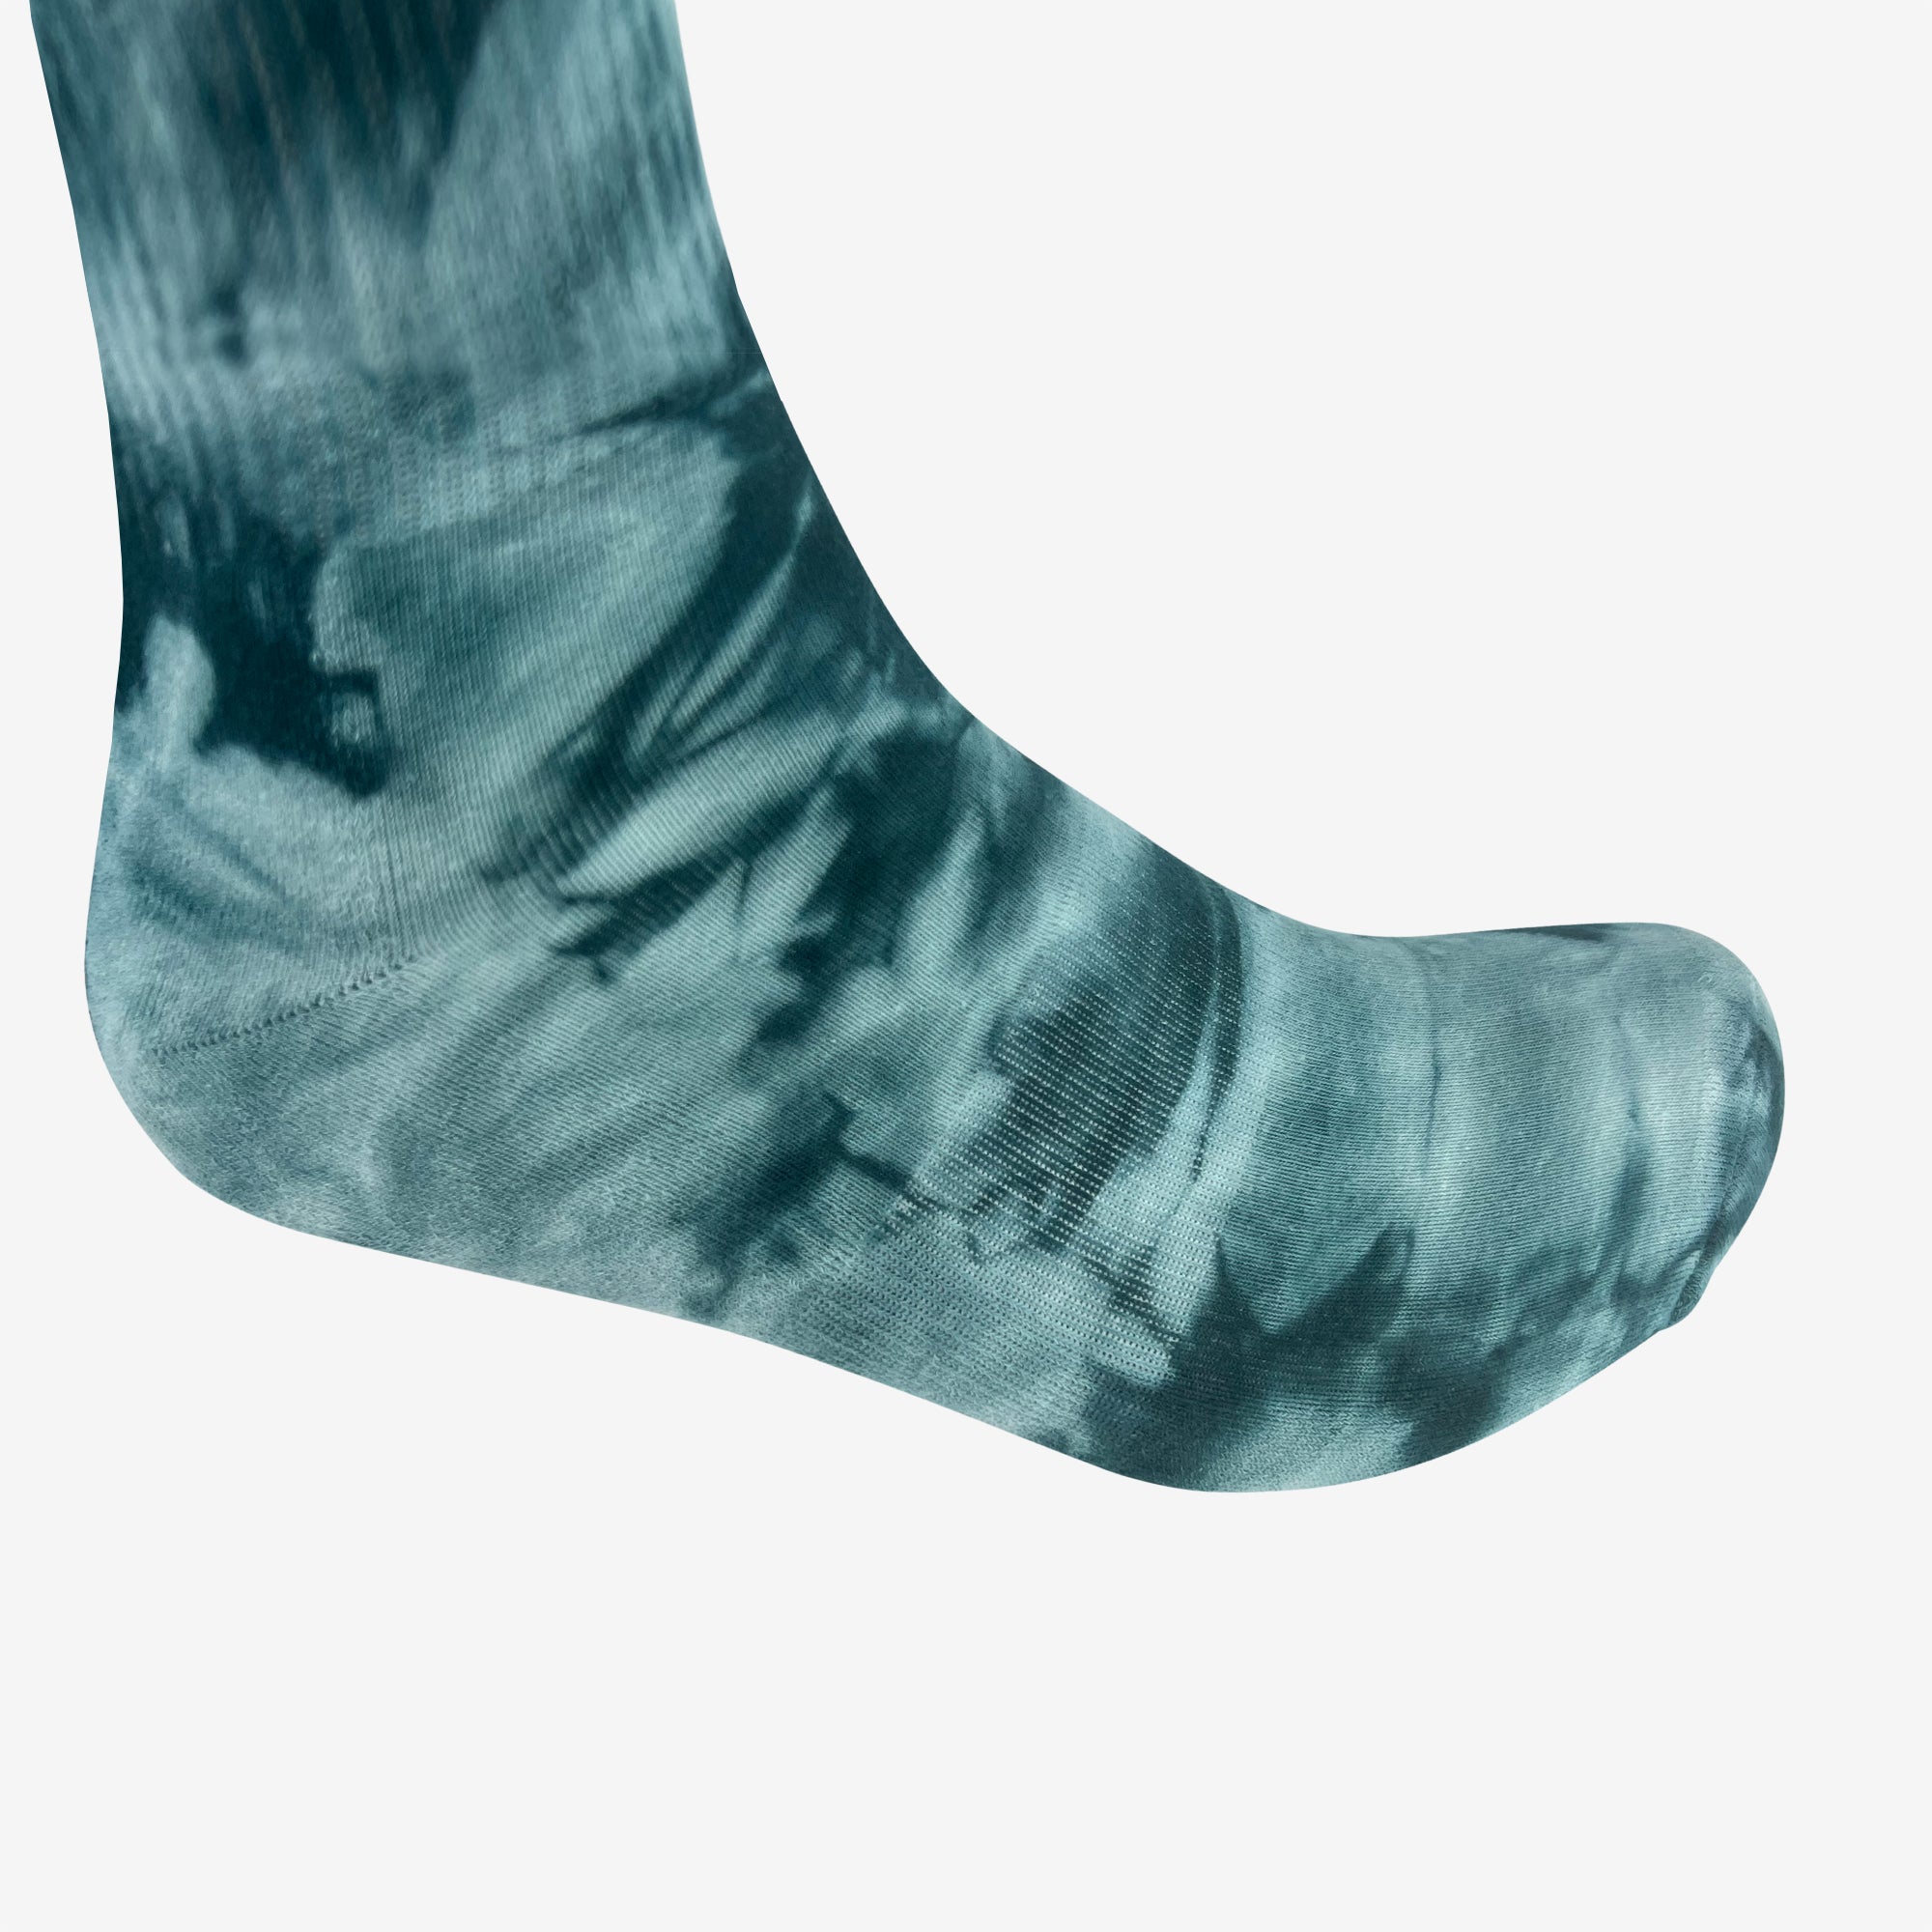 Close up of foot wearing a high-cut light and dark blue crew sock.